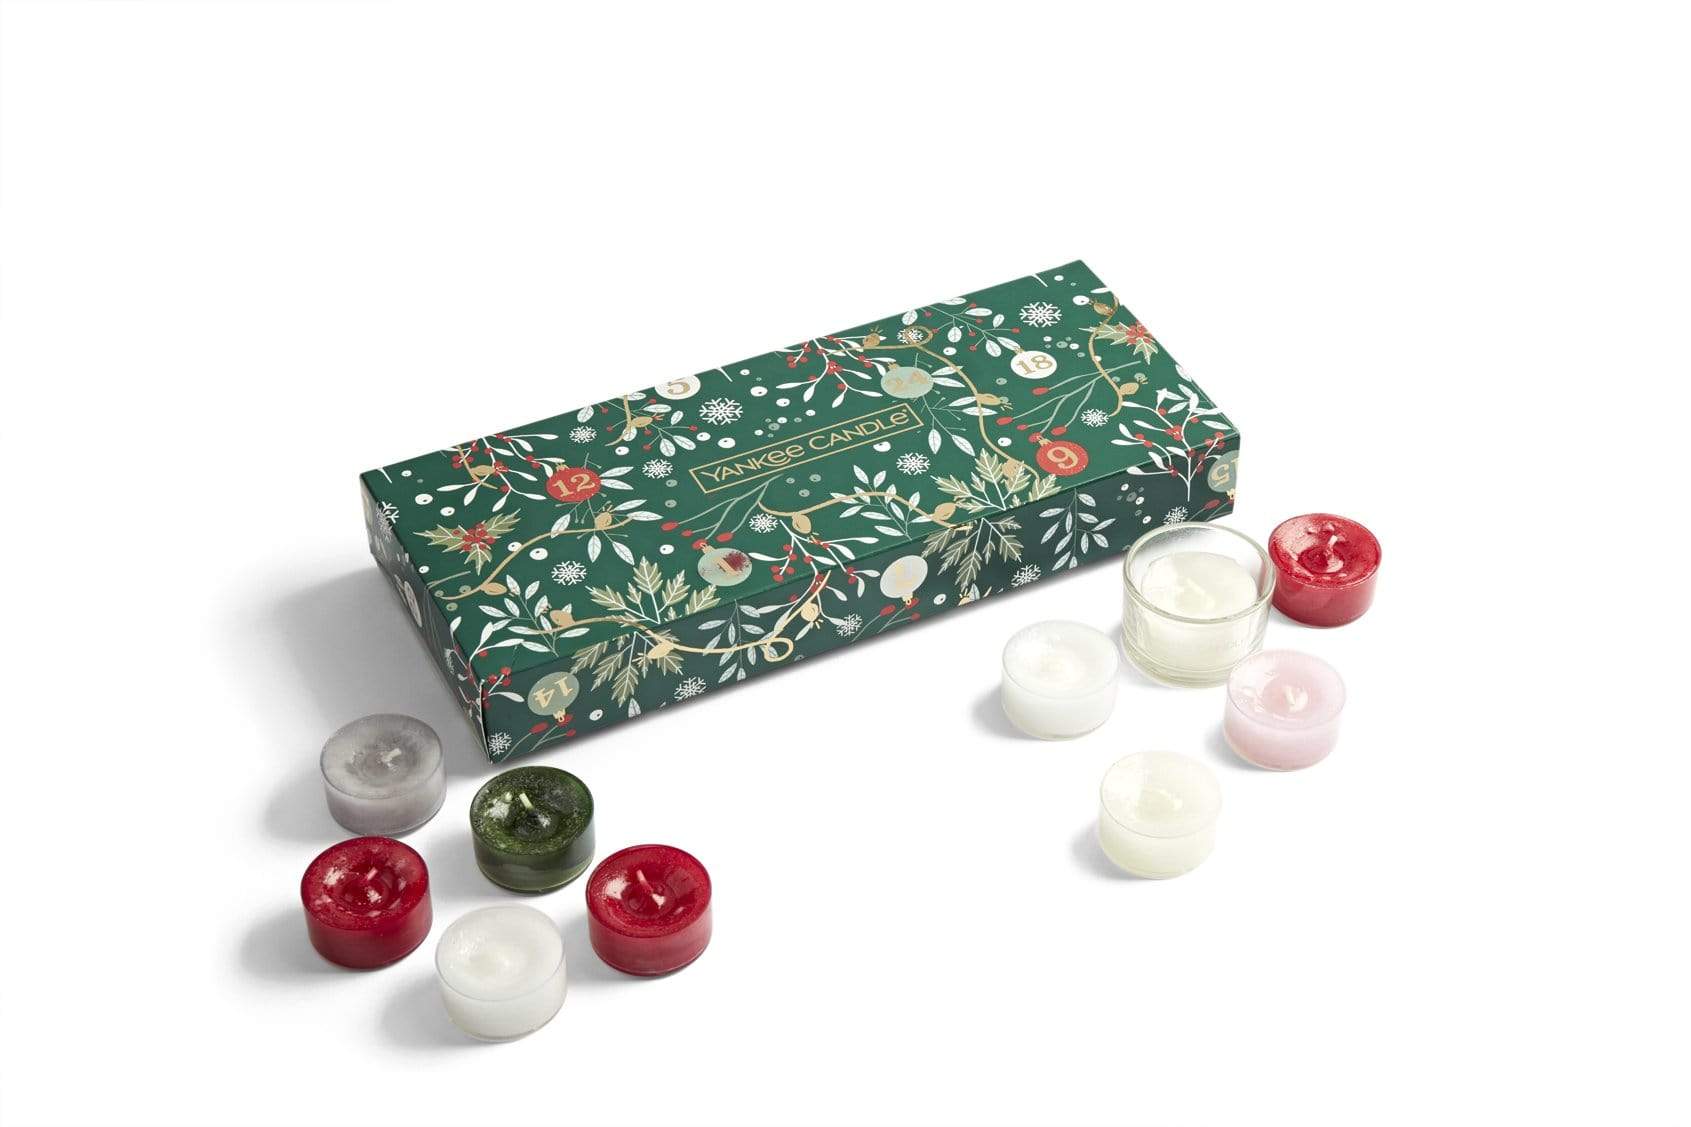 Yankee Candle Gift Set Yankee Candle Countdown to Christmas Gift Set - 10 Tealights & 1 Holder